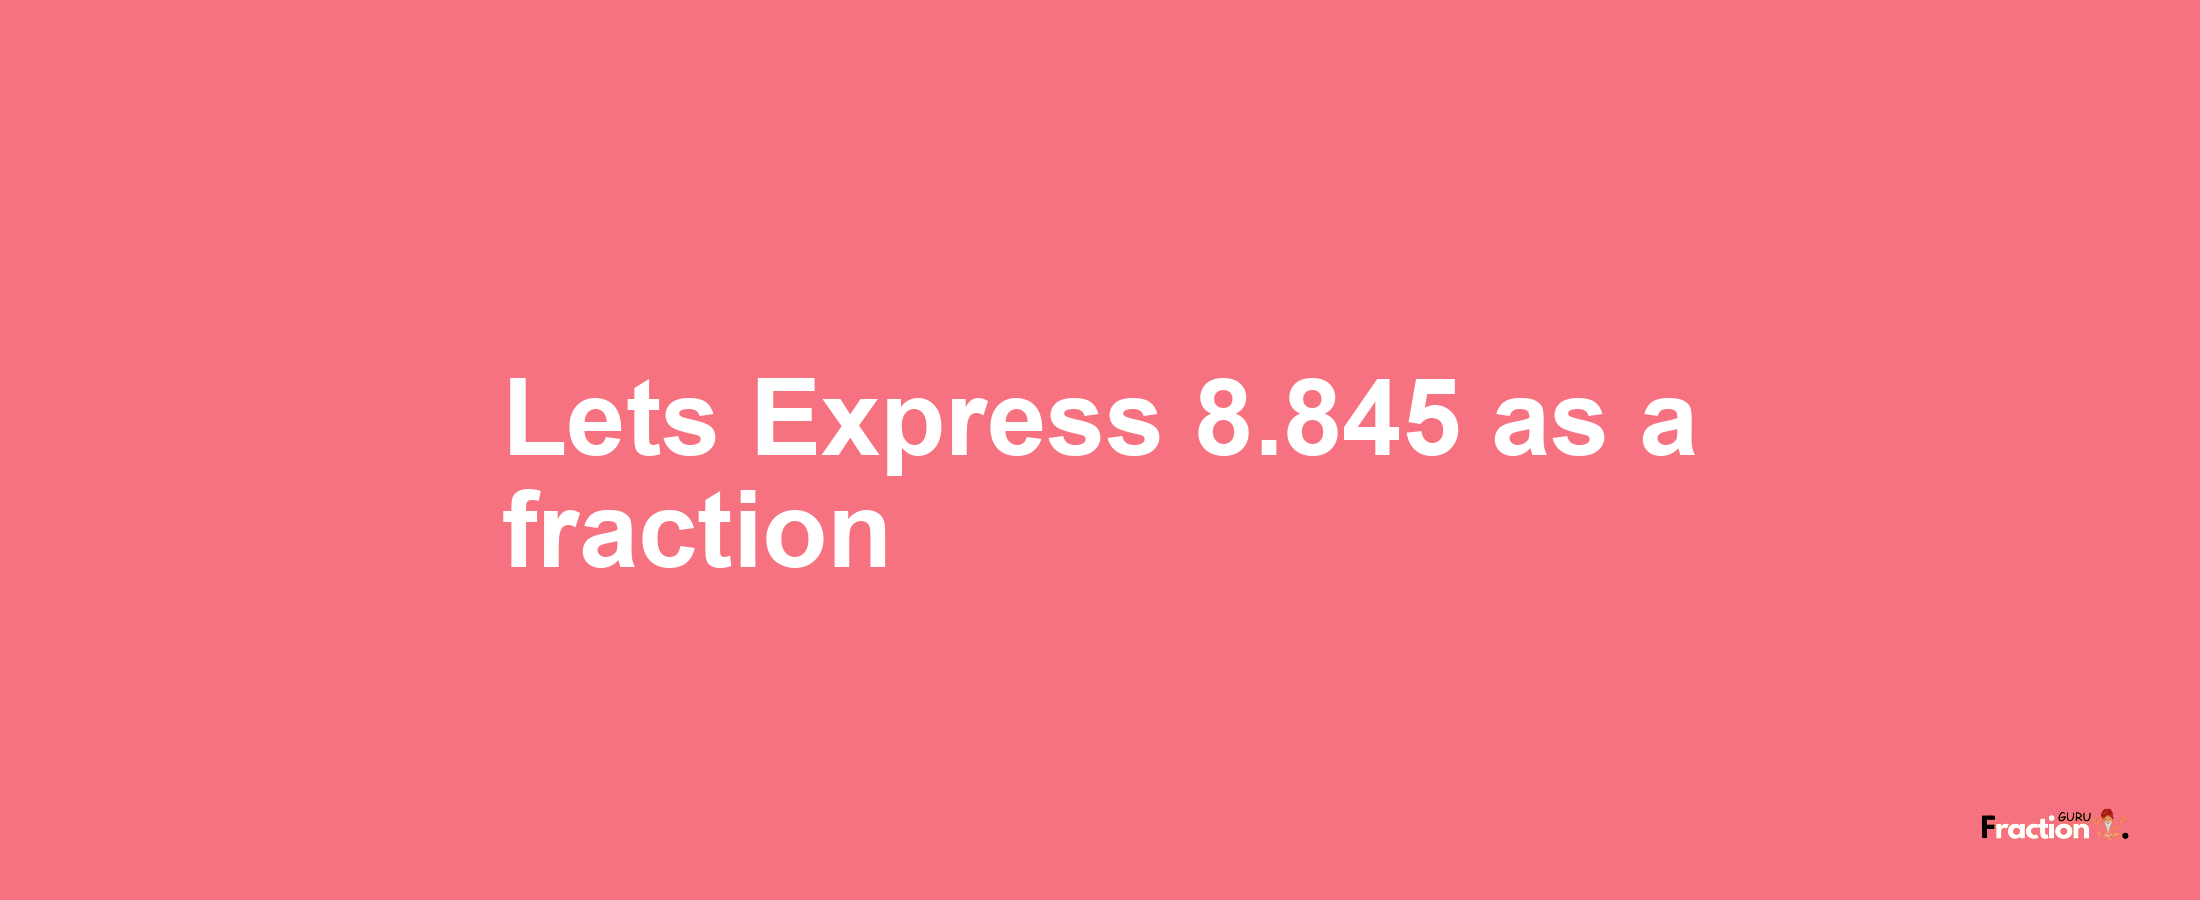 Lets Express 8.845 as afraction